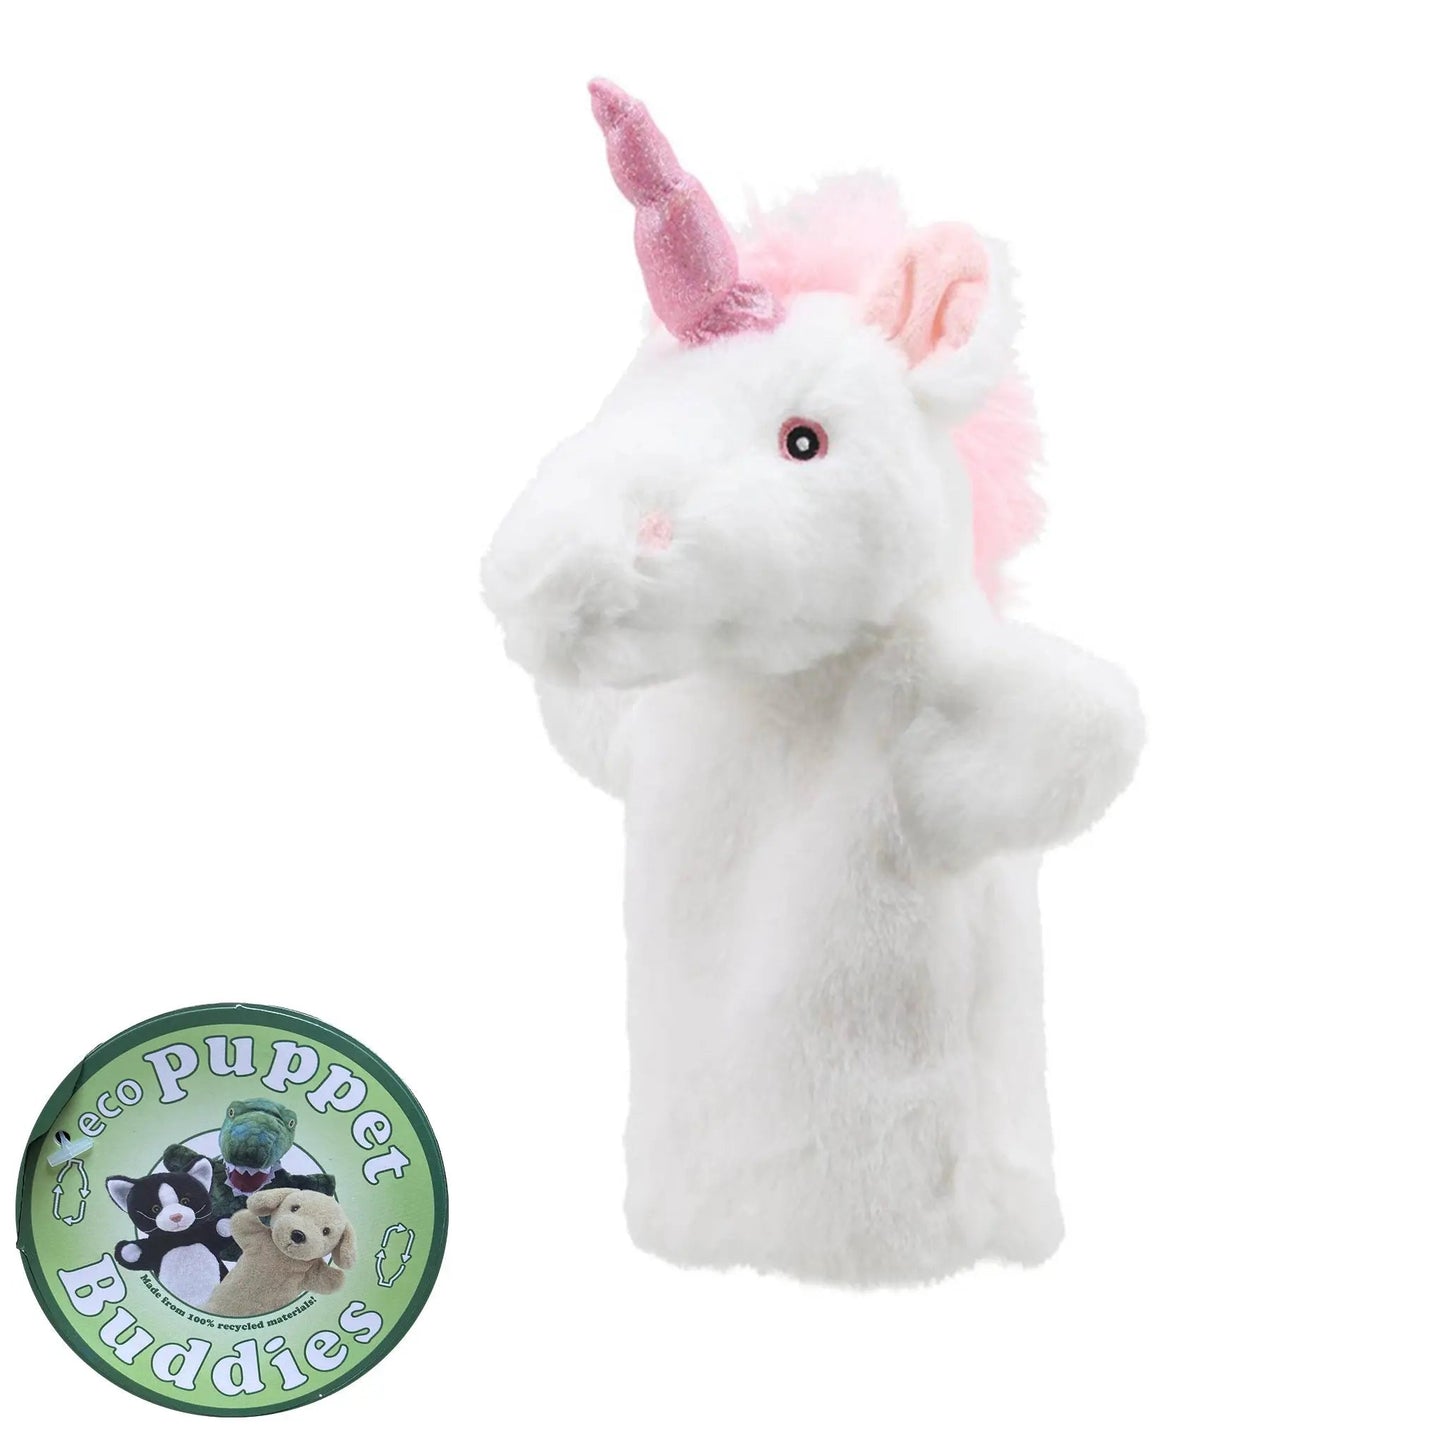 Unicorn Eco Puppet Buddies Hand Puppet - The Puppet Company - The Forgotten Toy Shop